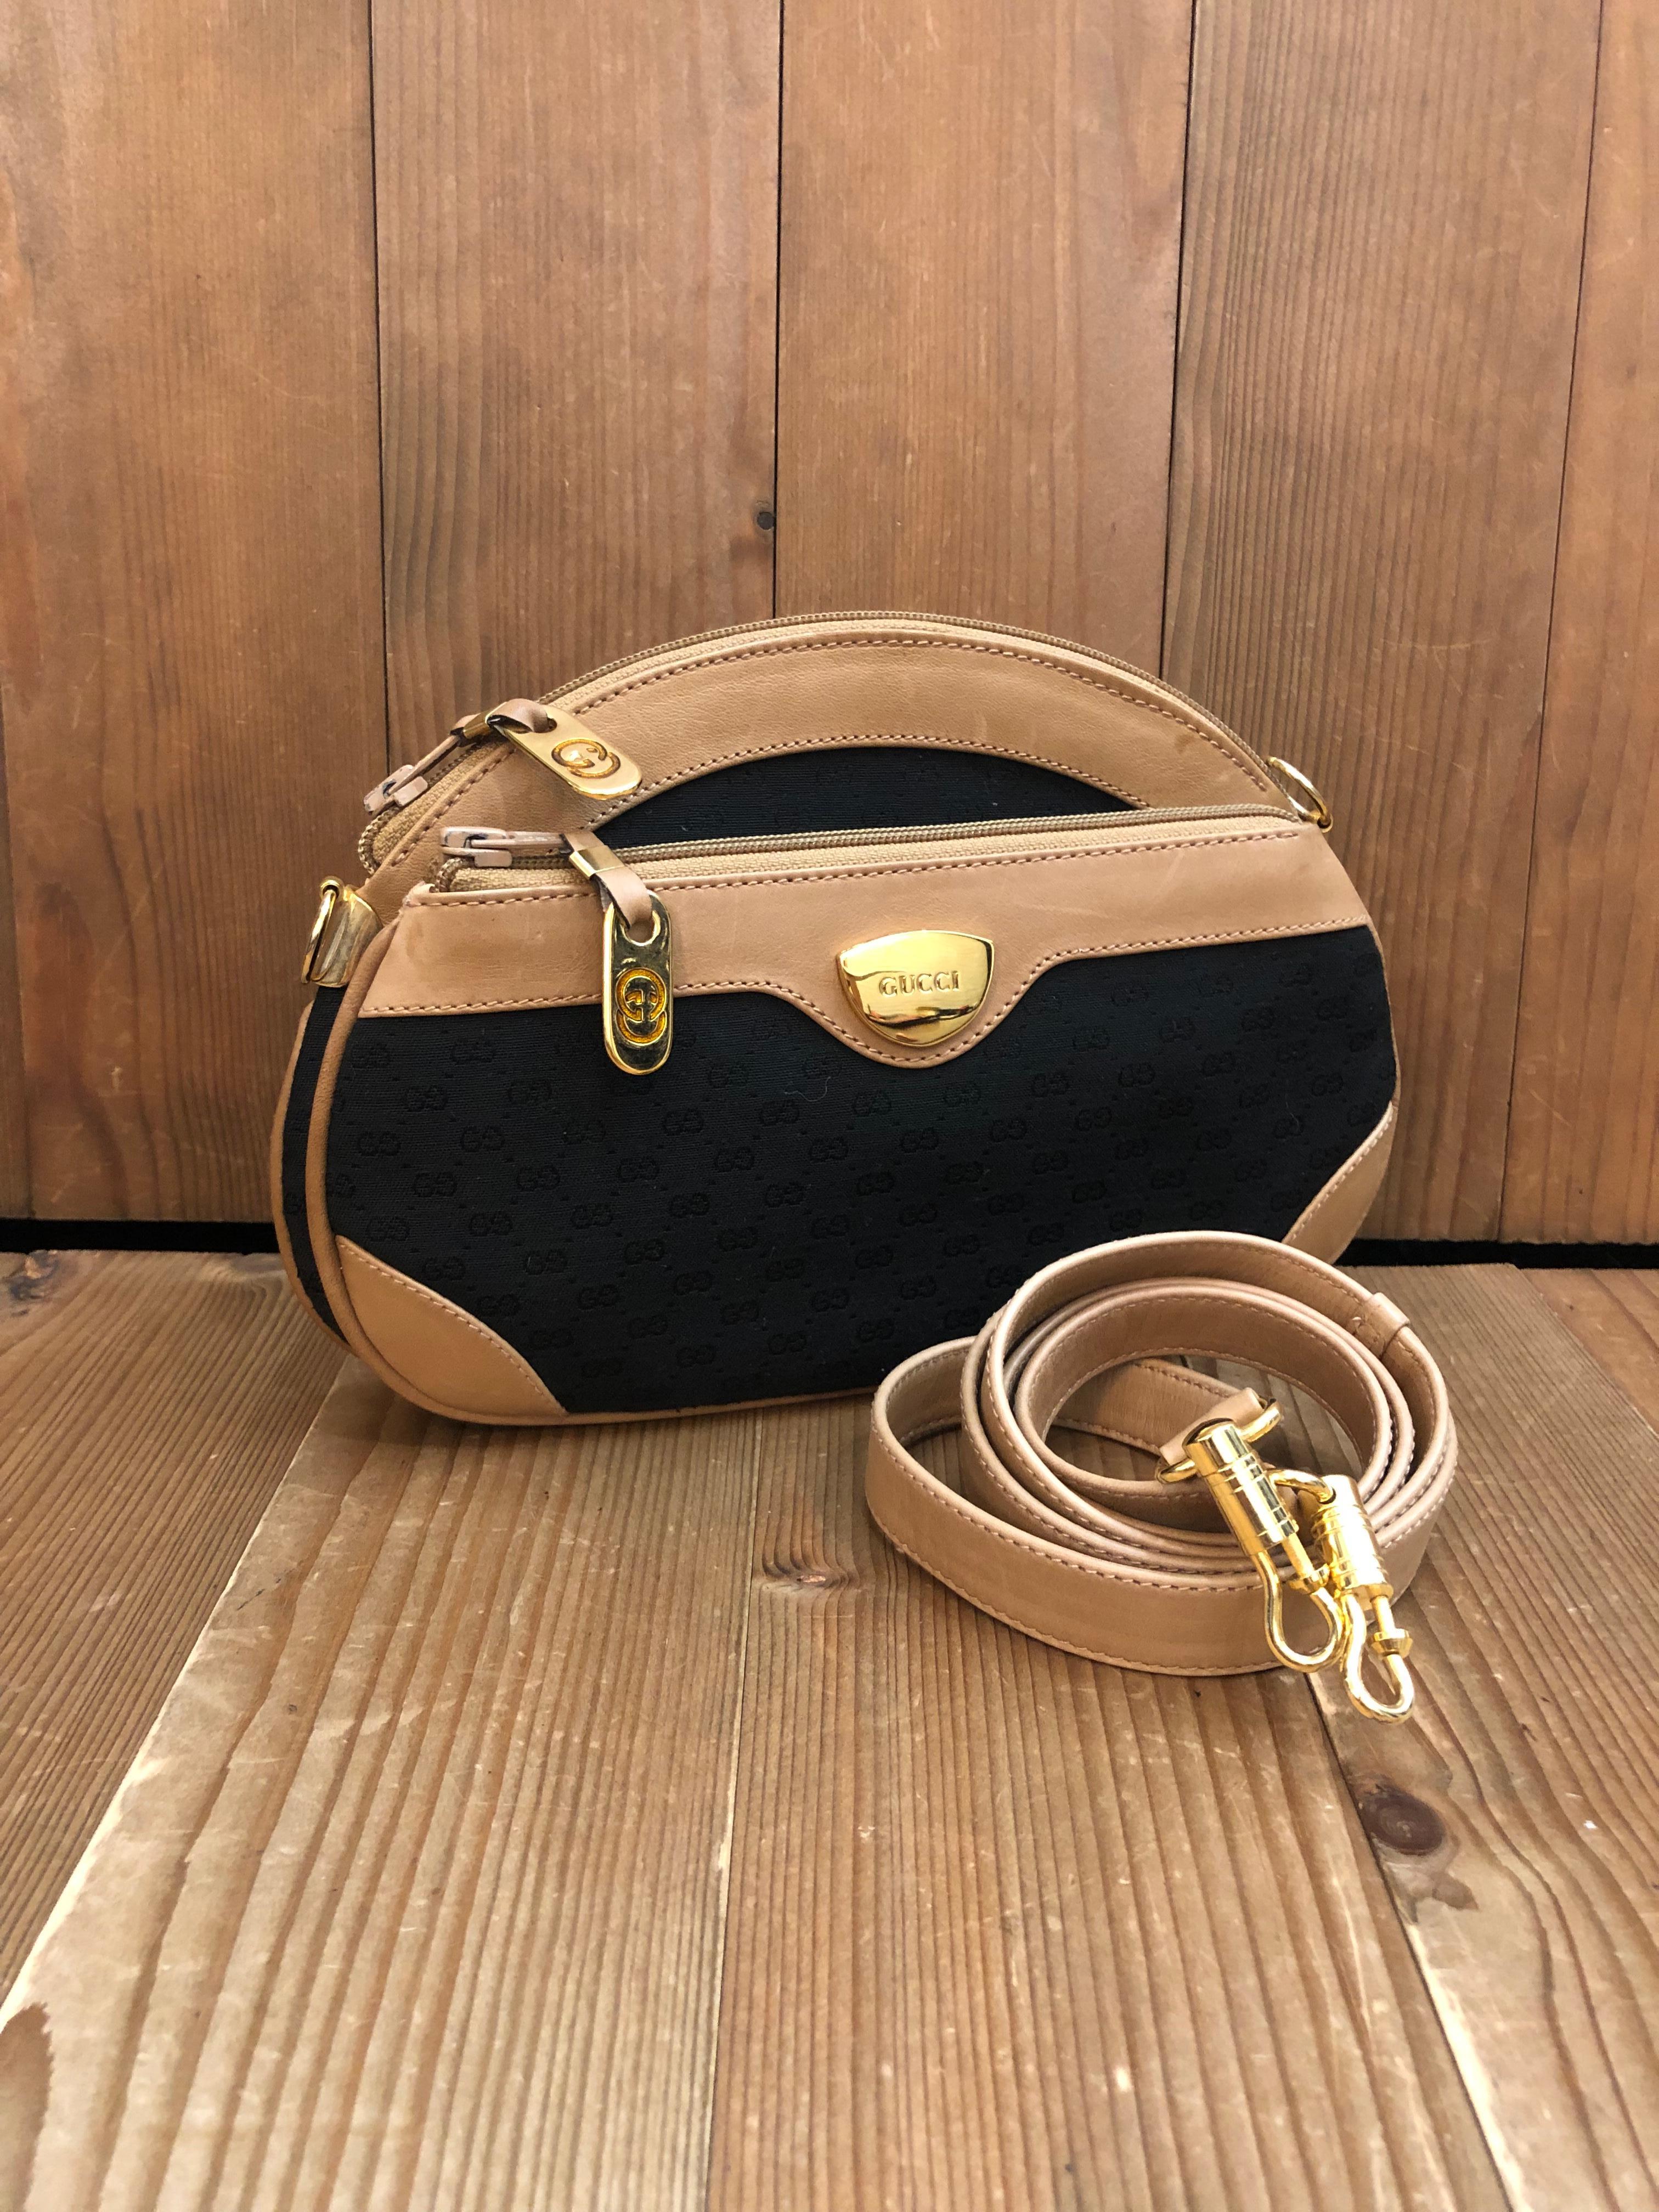 This Vintage GUCCI crossbody bag is crafted of micro GG jacquard in black trimmed with smooth calfskin leather in beige and gold toned hardware. This Gucci features two flat zippered pockets lined with beige pigskin leather with one interior